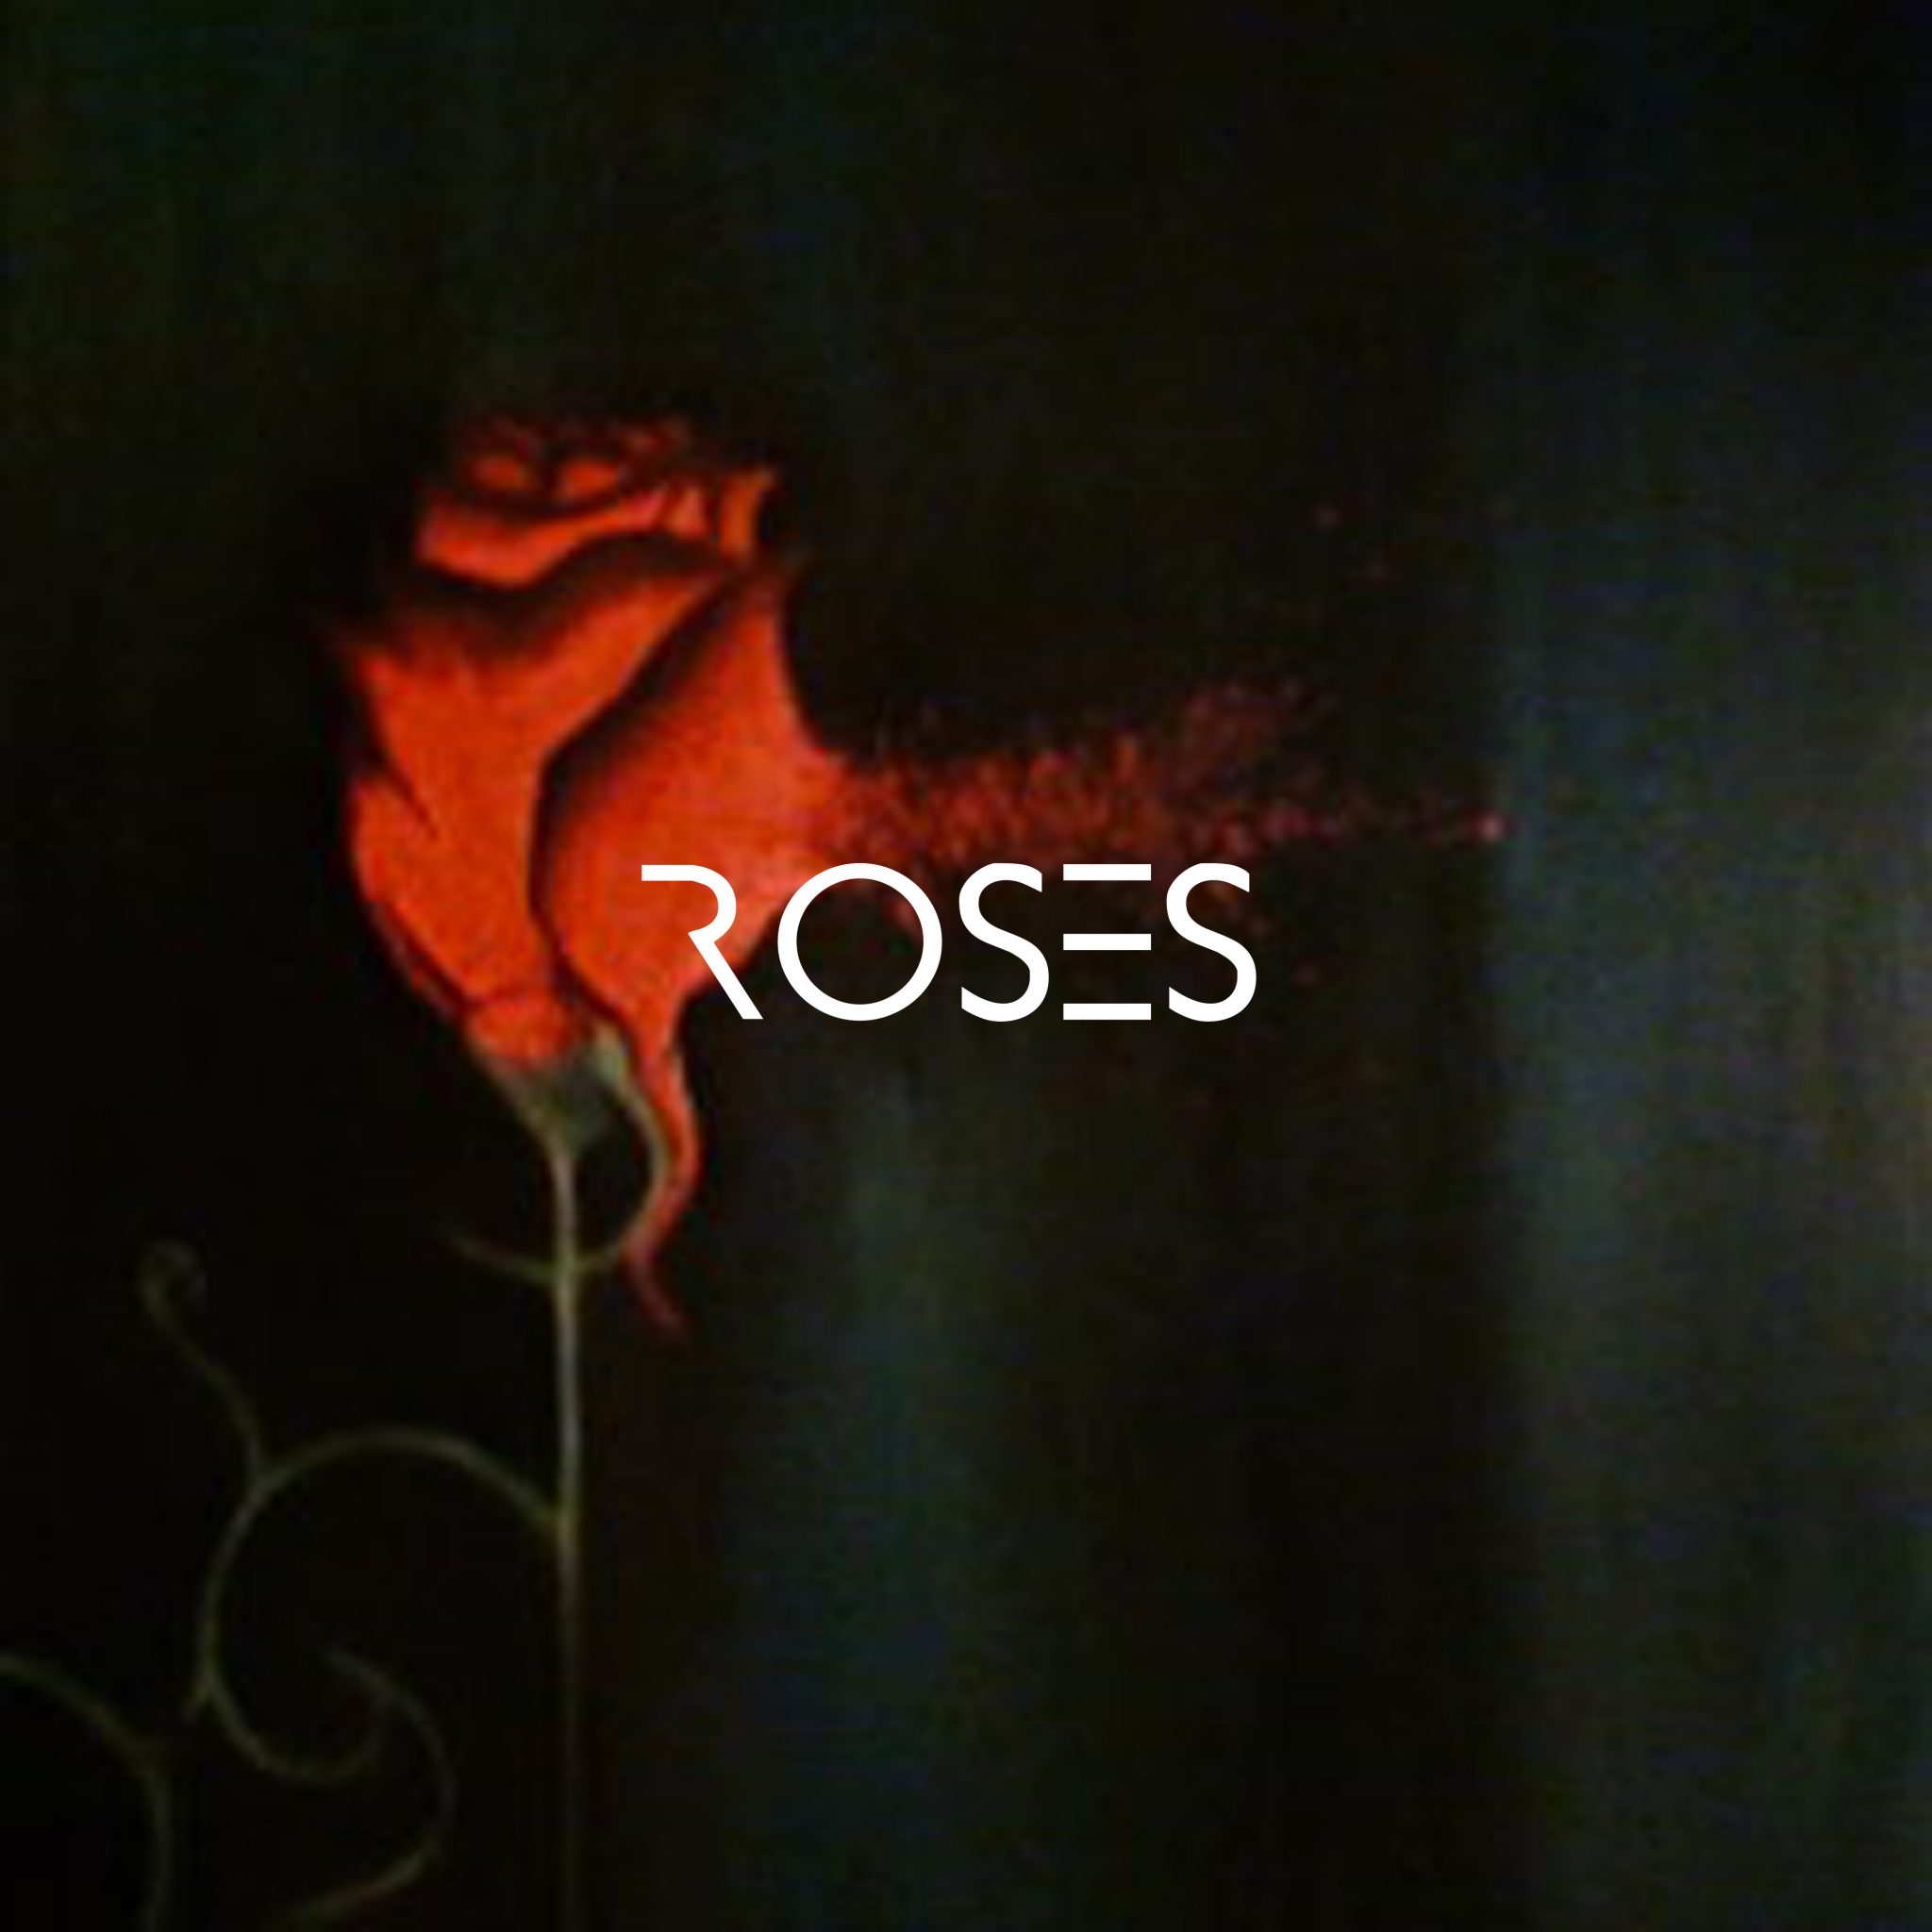 News Added Feb 23, 2013 Roses Ep 8/31 Submitted By Brandon Levy Track list: Added Feb 23, 2013 1. Names 2. She Was Radioactive 3. I Could Have That Power 4. By Suprise 5. Lockdown Spending 6. Every Teardrop Is Adrenaline 7. Haunted Hysteria 8. Just The Tip Submitted By Brandon Levy Audio Added Feb […]